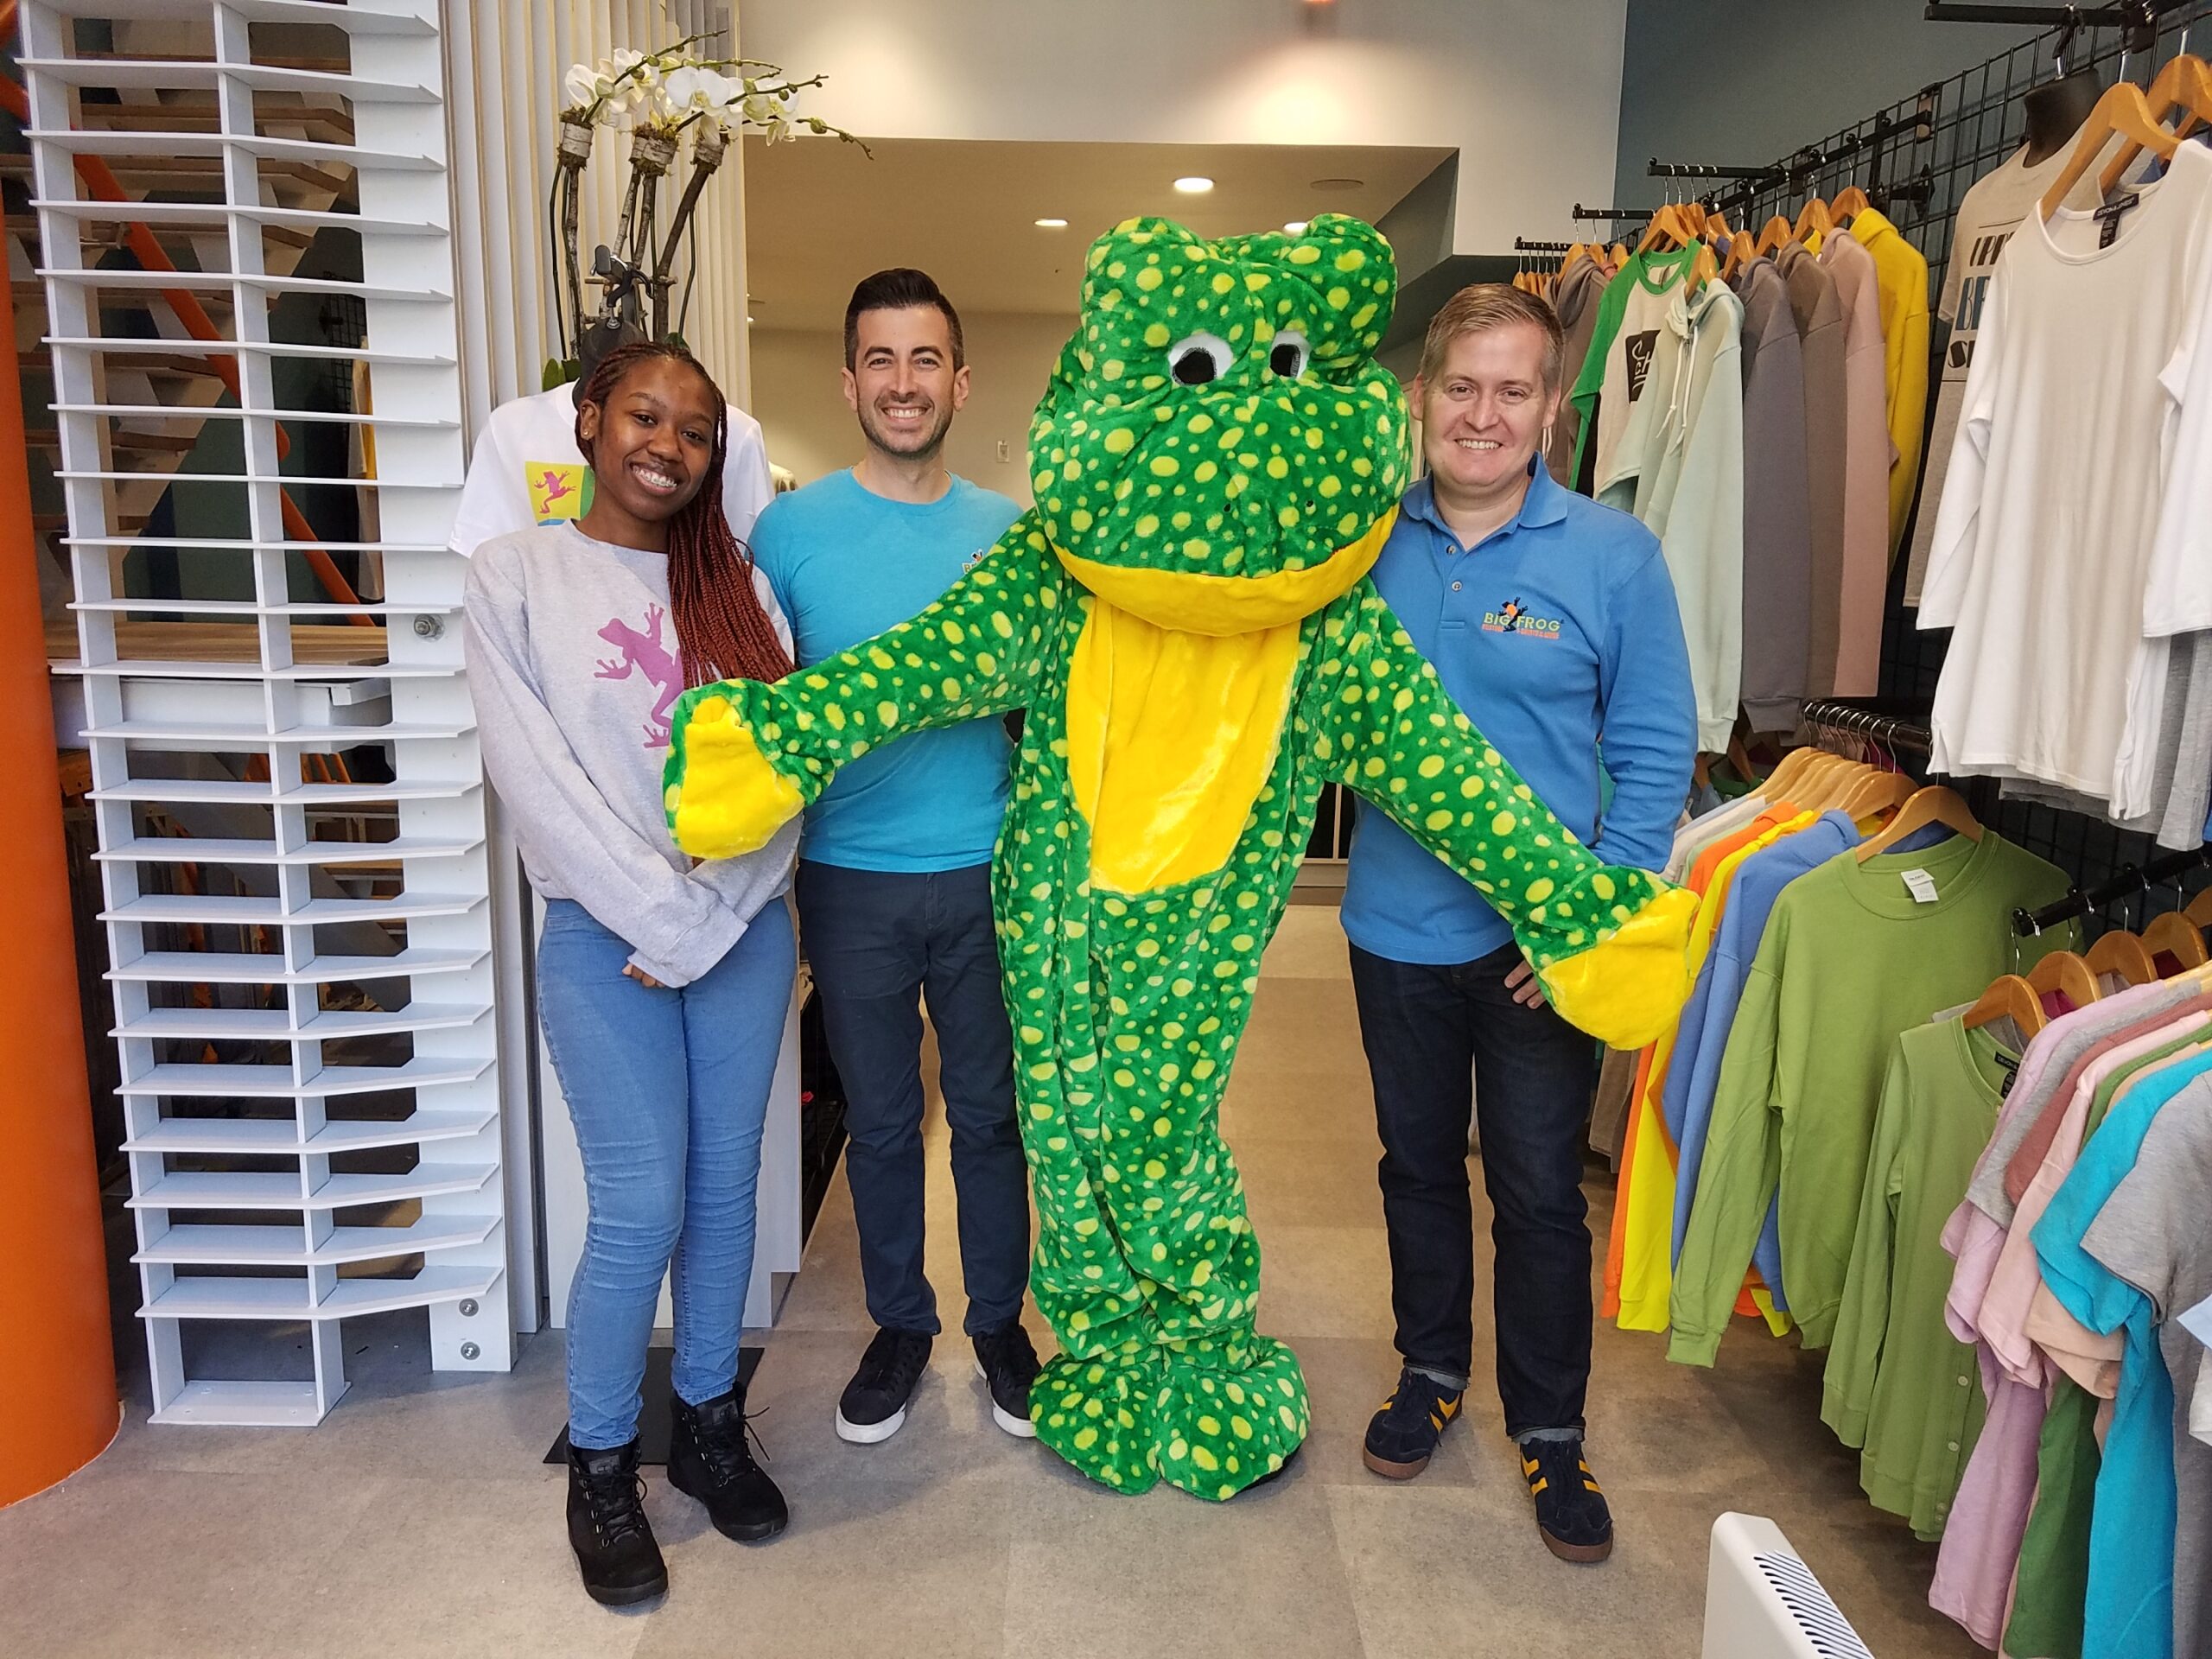 Big Frog Custom T-Shirts & More of The Upper West Side, Manhattan, New York store owners, Kerry Colley and Josh Drumm, standing with a female employee and a person wearing a Big Frog costume, inside the store